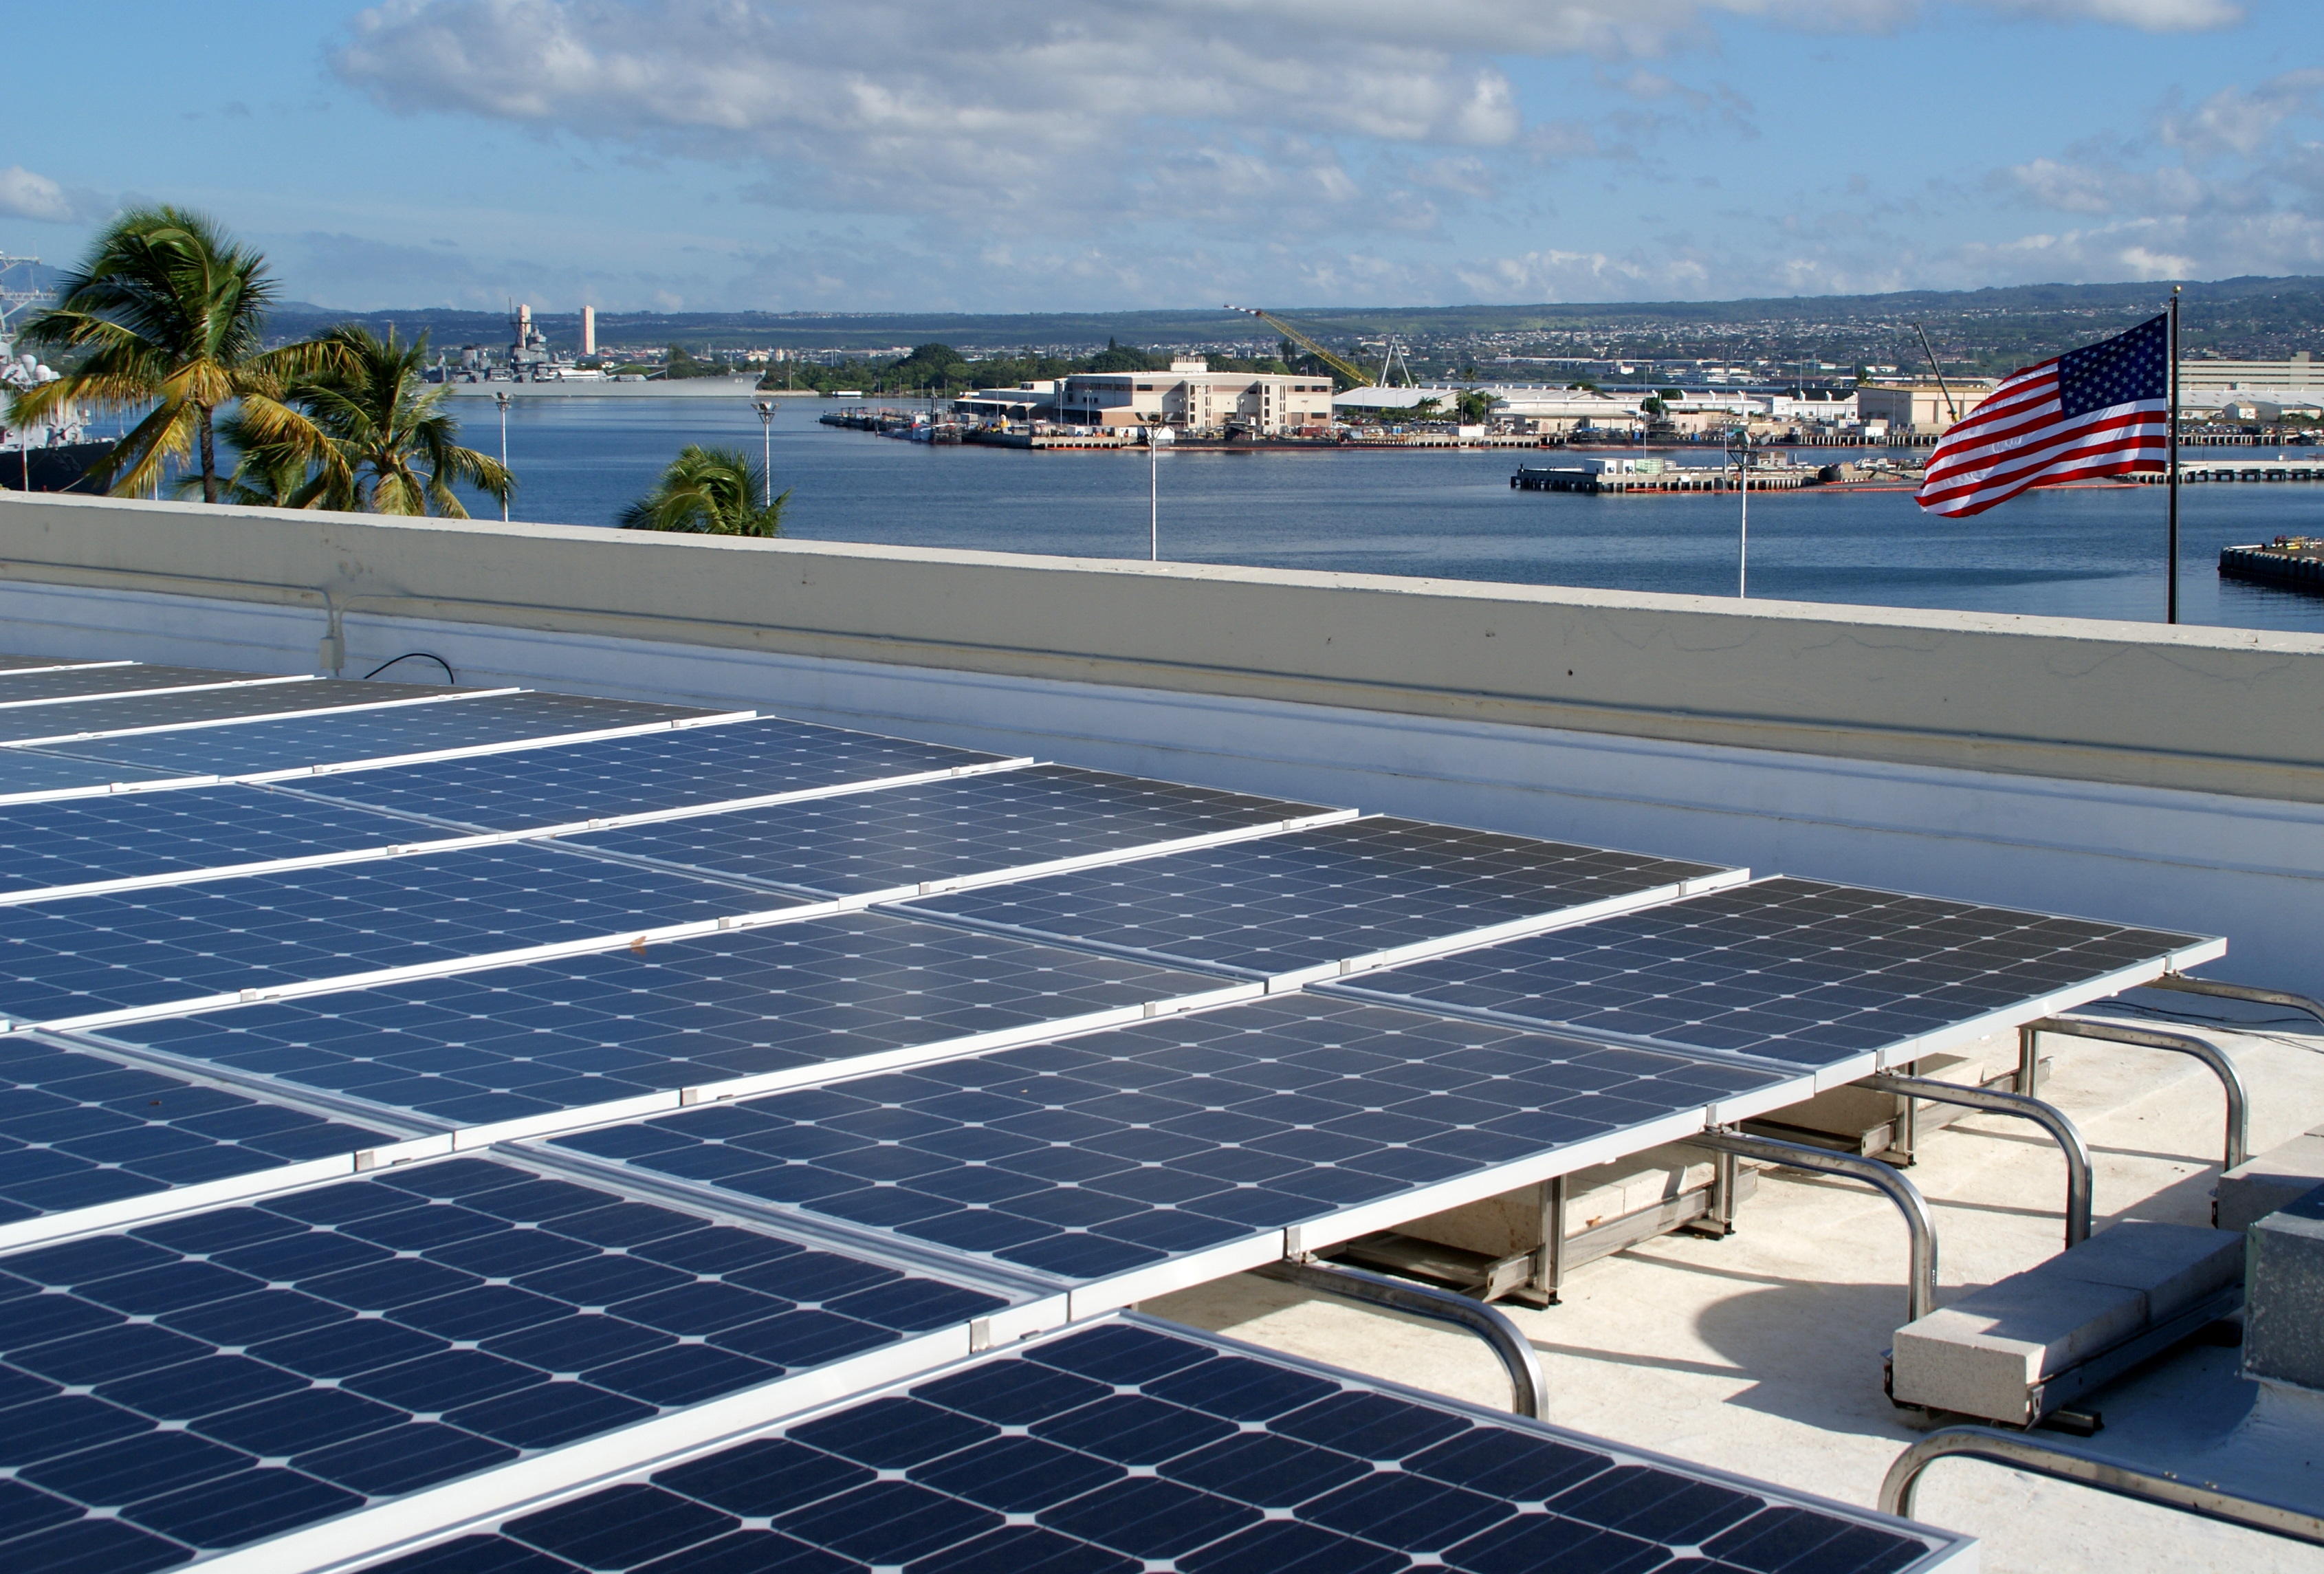 Photo of one of five solar rooftop installations at Pearl Harbor-Hickam military base in Hawaii.